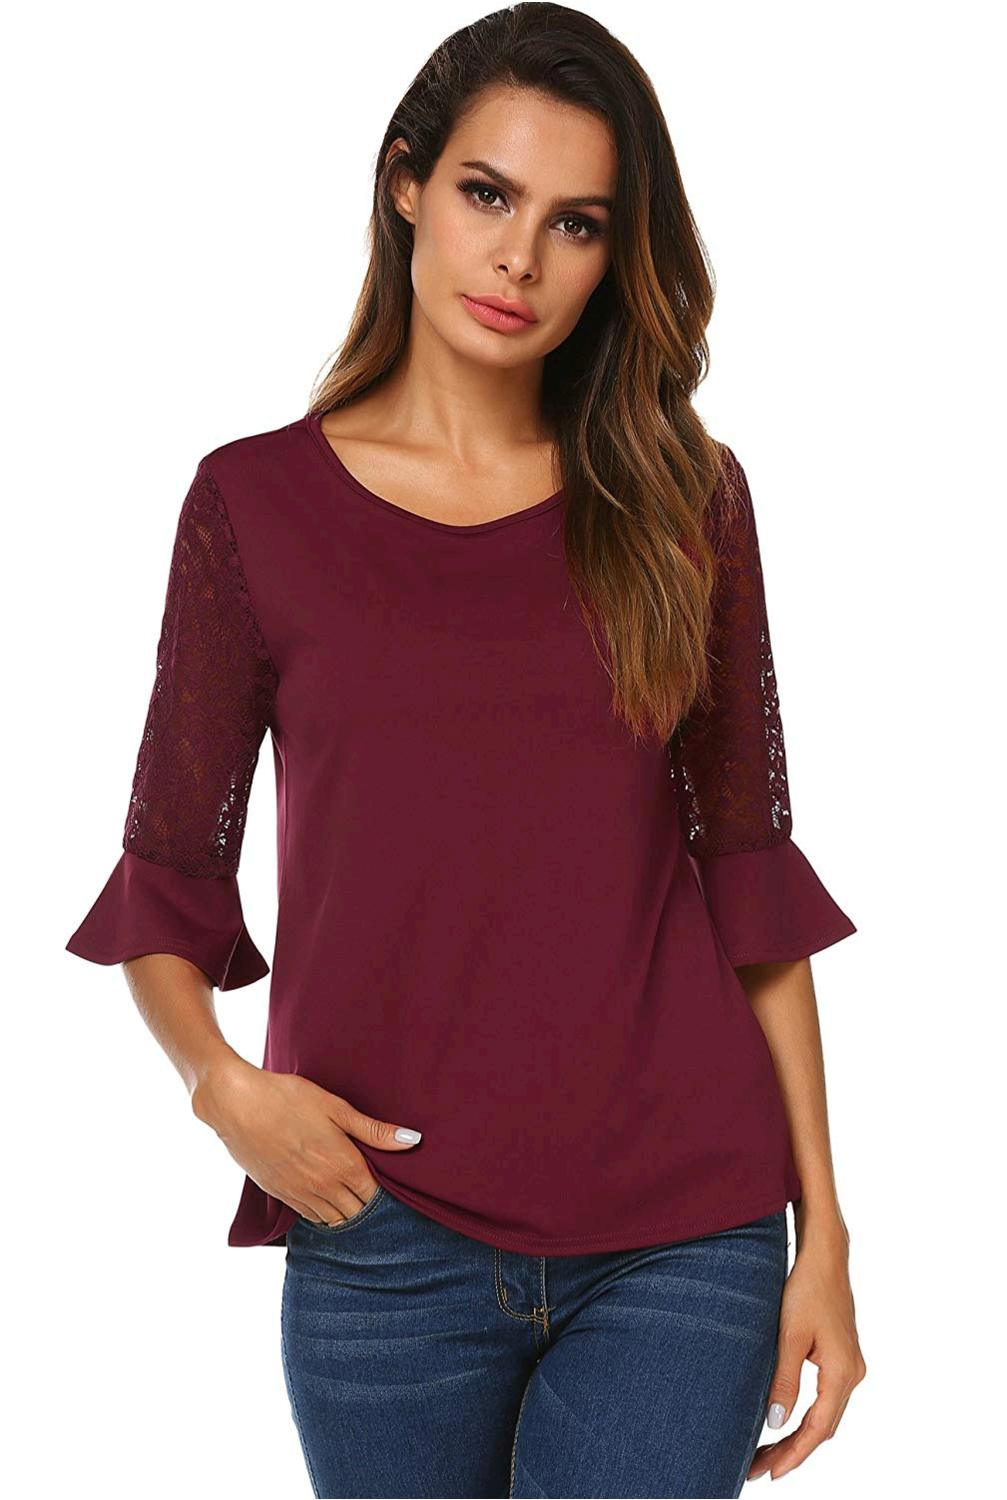 Women's Casual Short Bell Sleeve Tops Scoop Neck Pleated, Wine Red ...